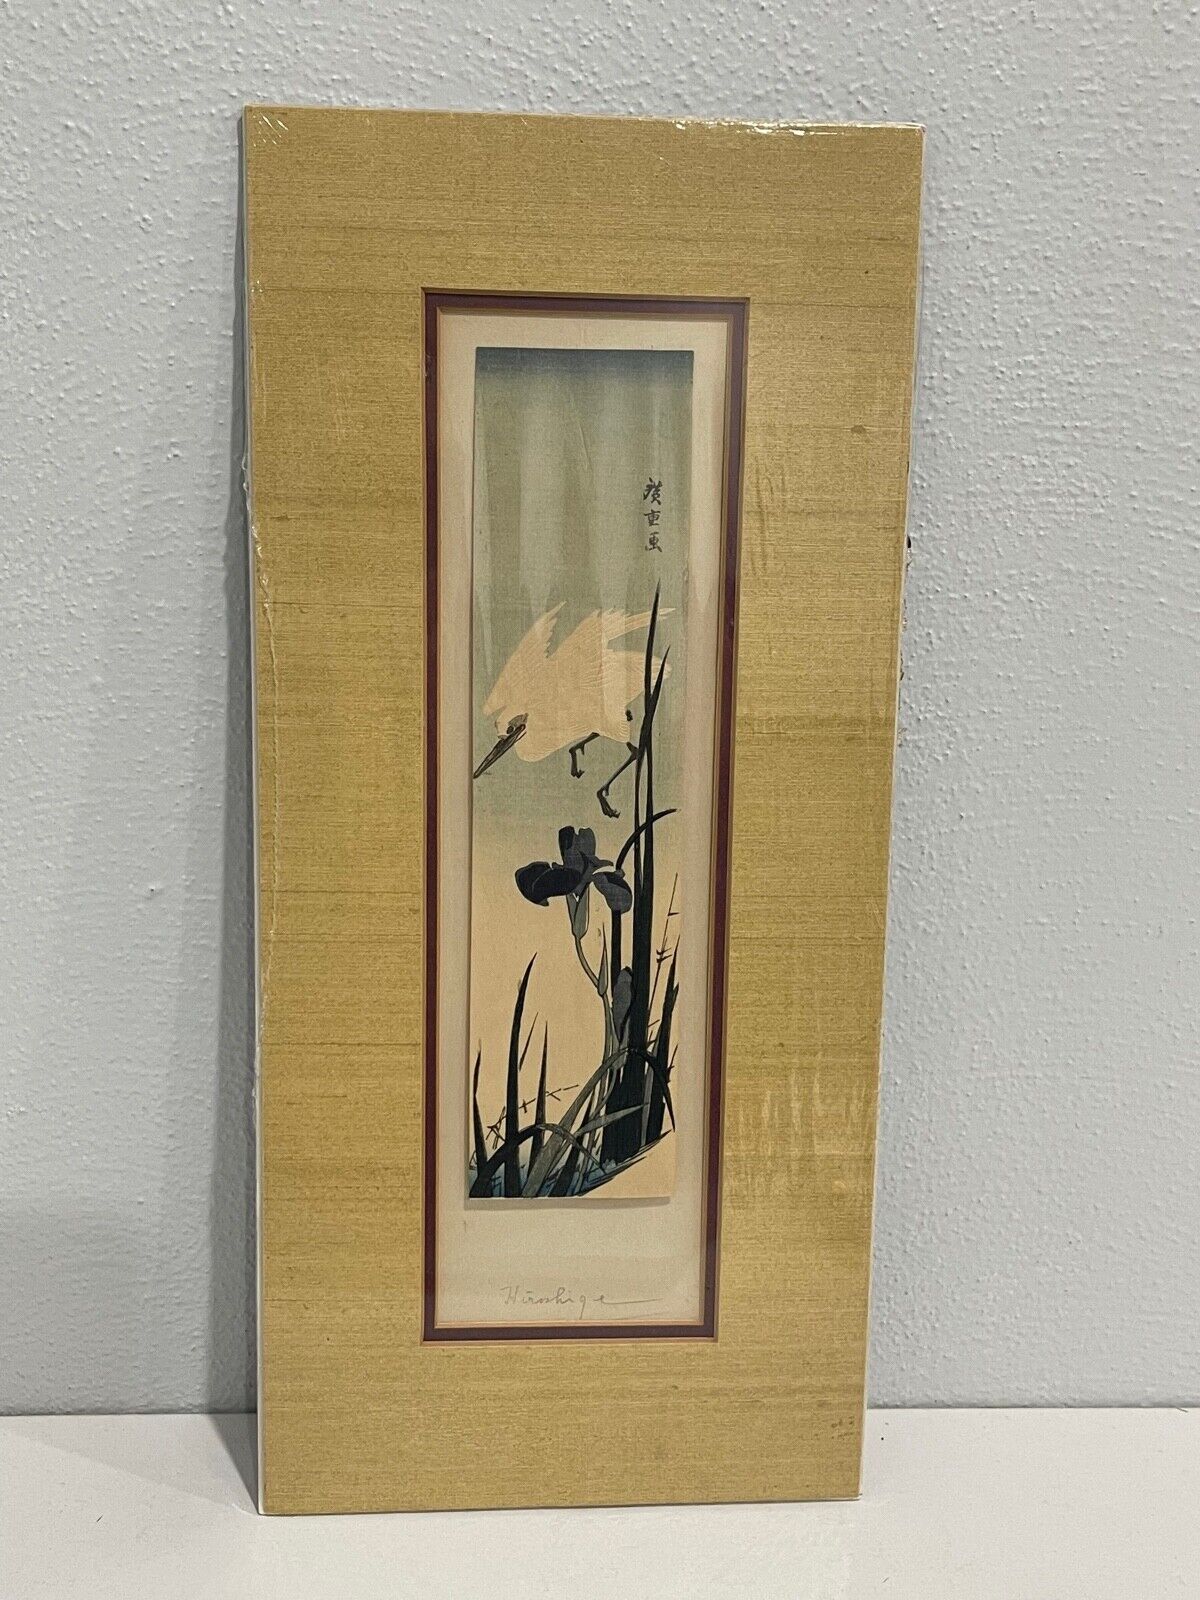 Vintage Antique Japanese Woodblock Print After Hiroshige White Heron and Iris